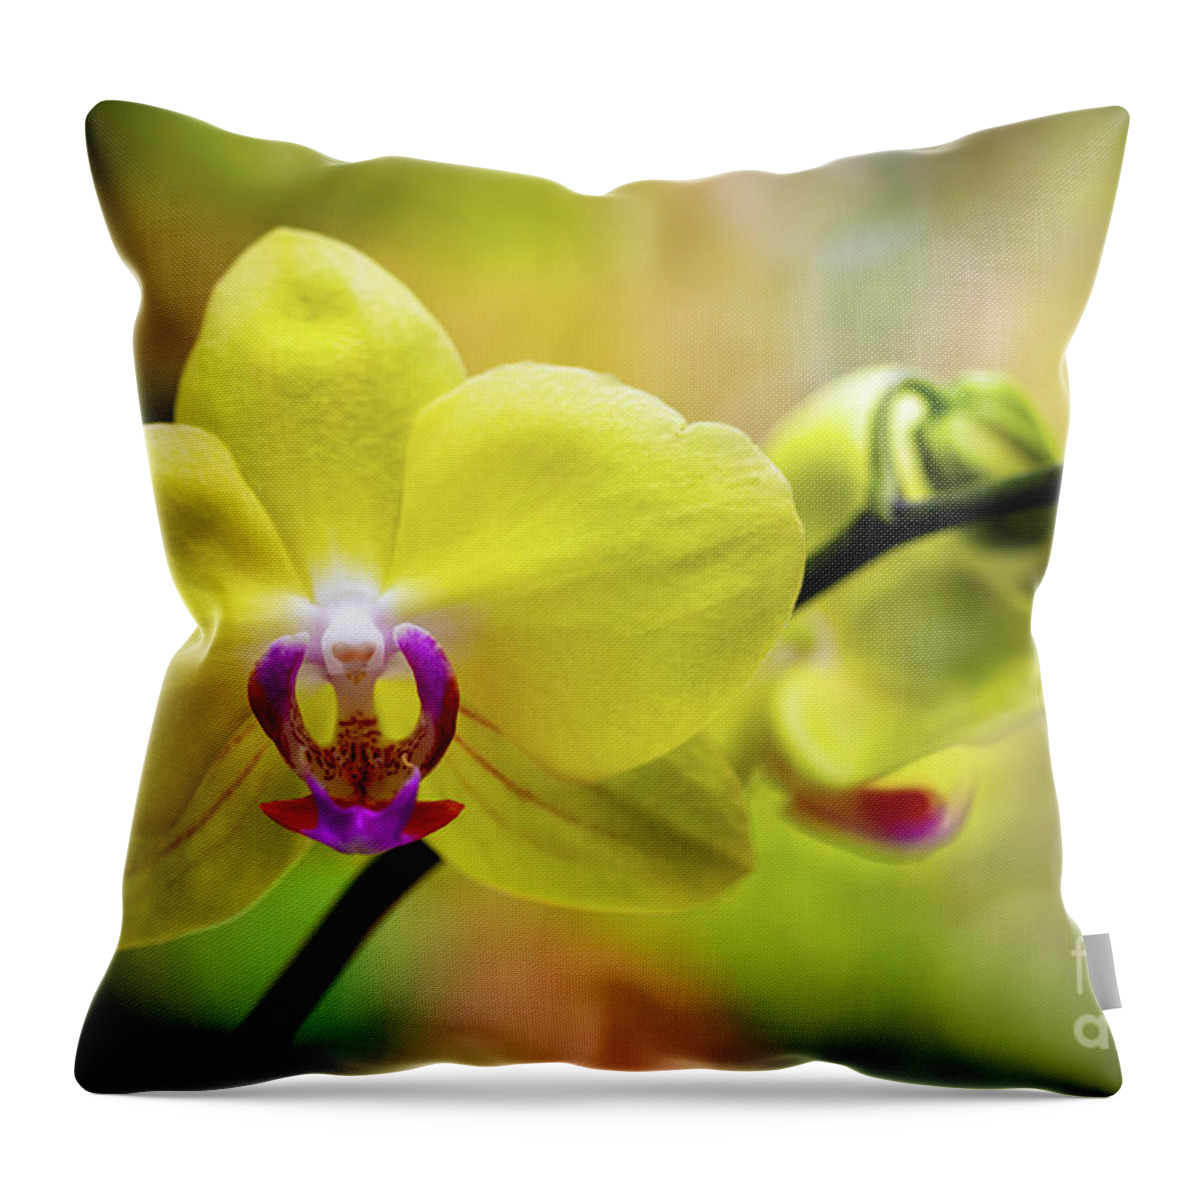 Background Throw Pillow featuring the photograph Yellow Orchid Flowers #1 by Raul Rodriguez